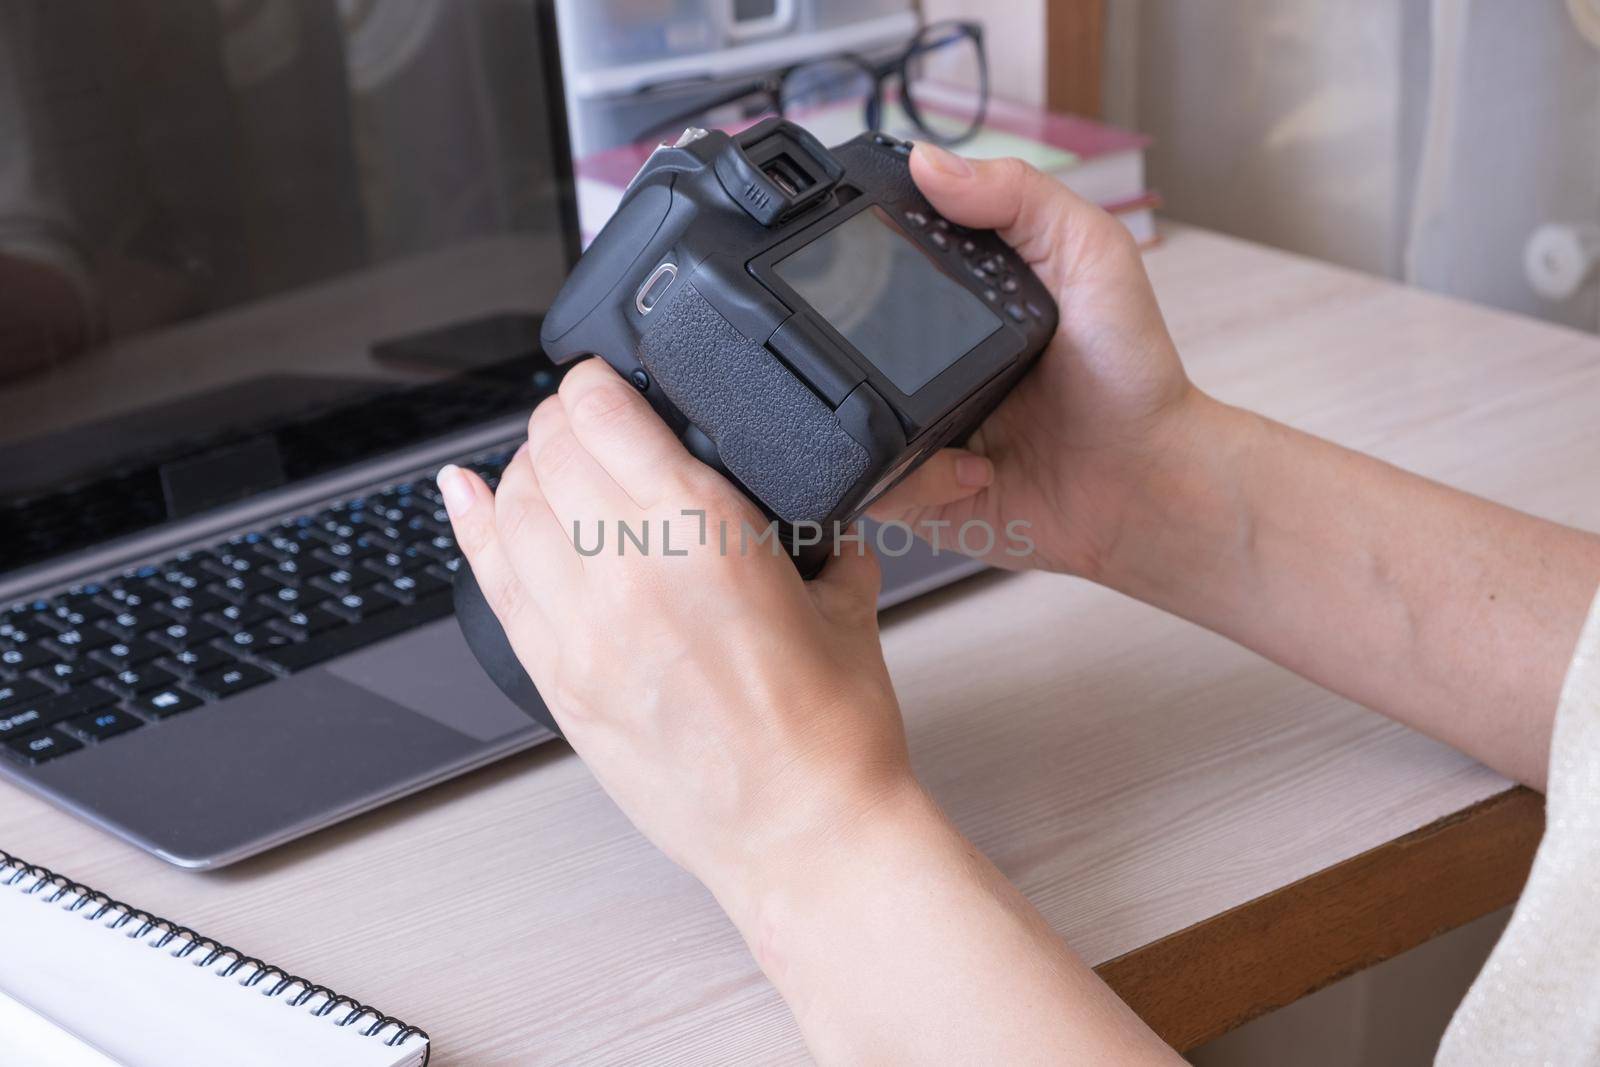 Studying online photography lessons. Female hands holding SLR camera at desktop with laptop by ssvimaliss